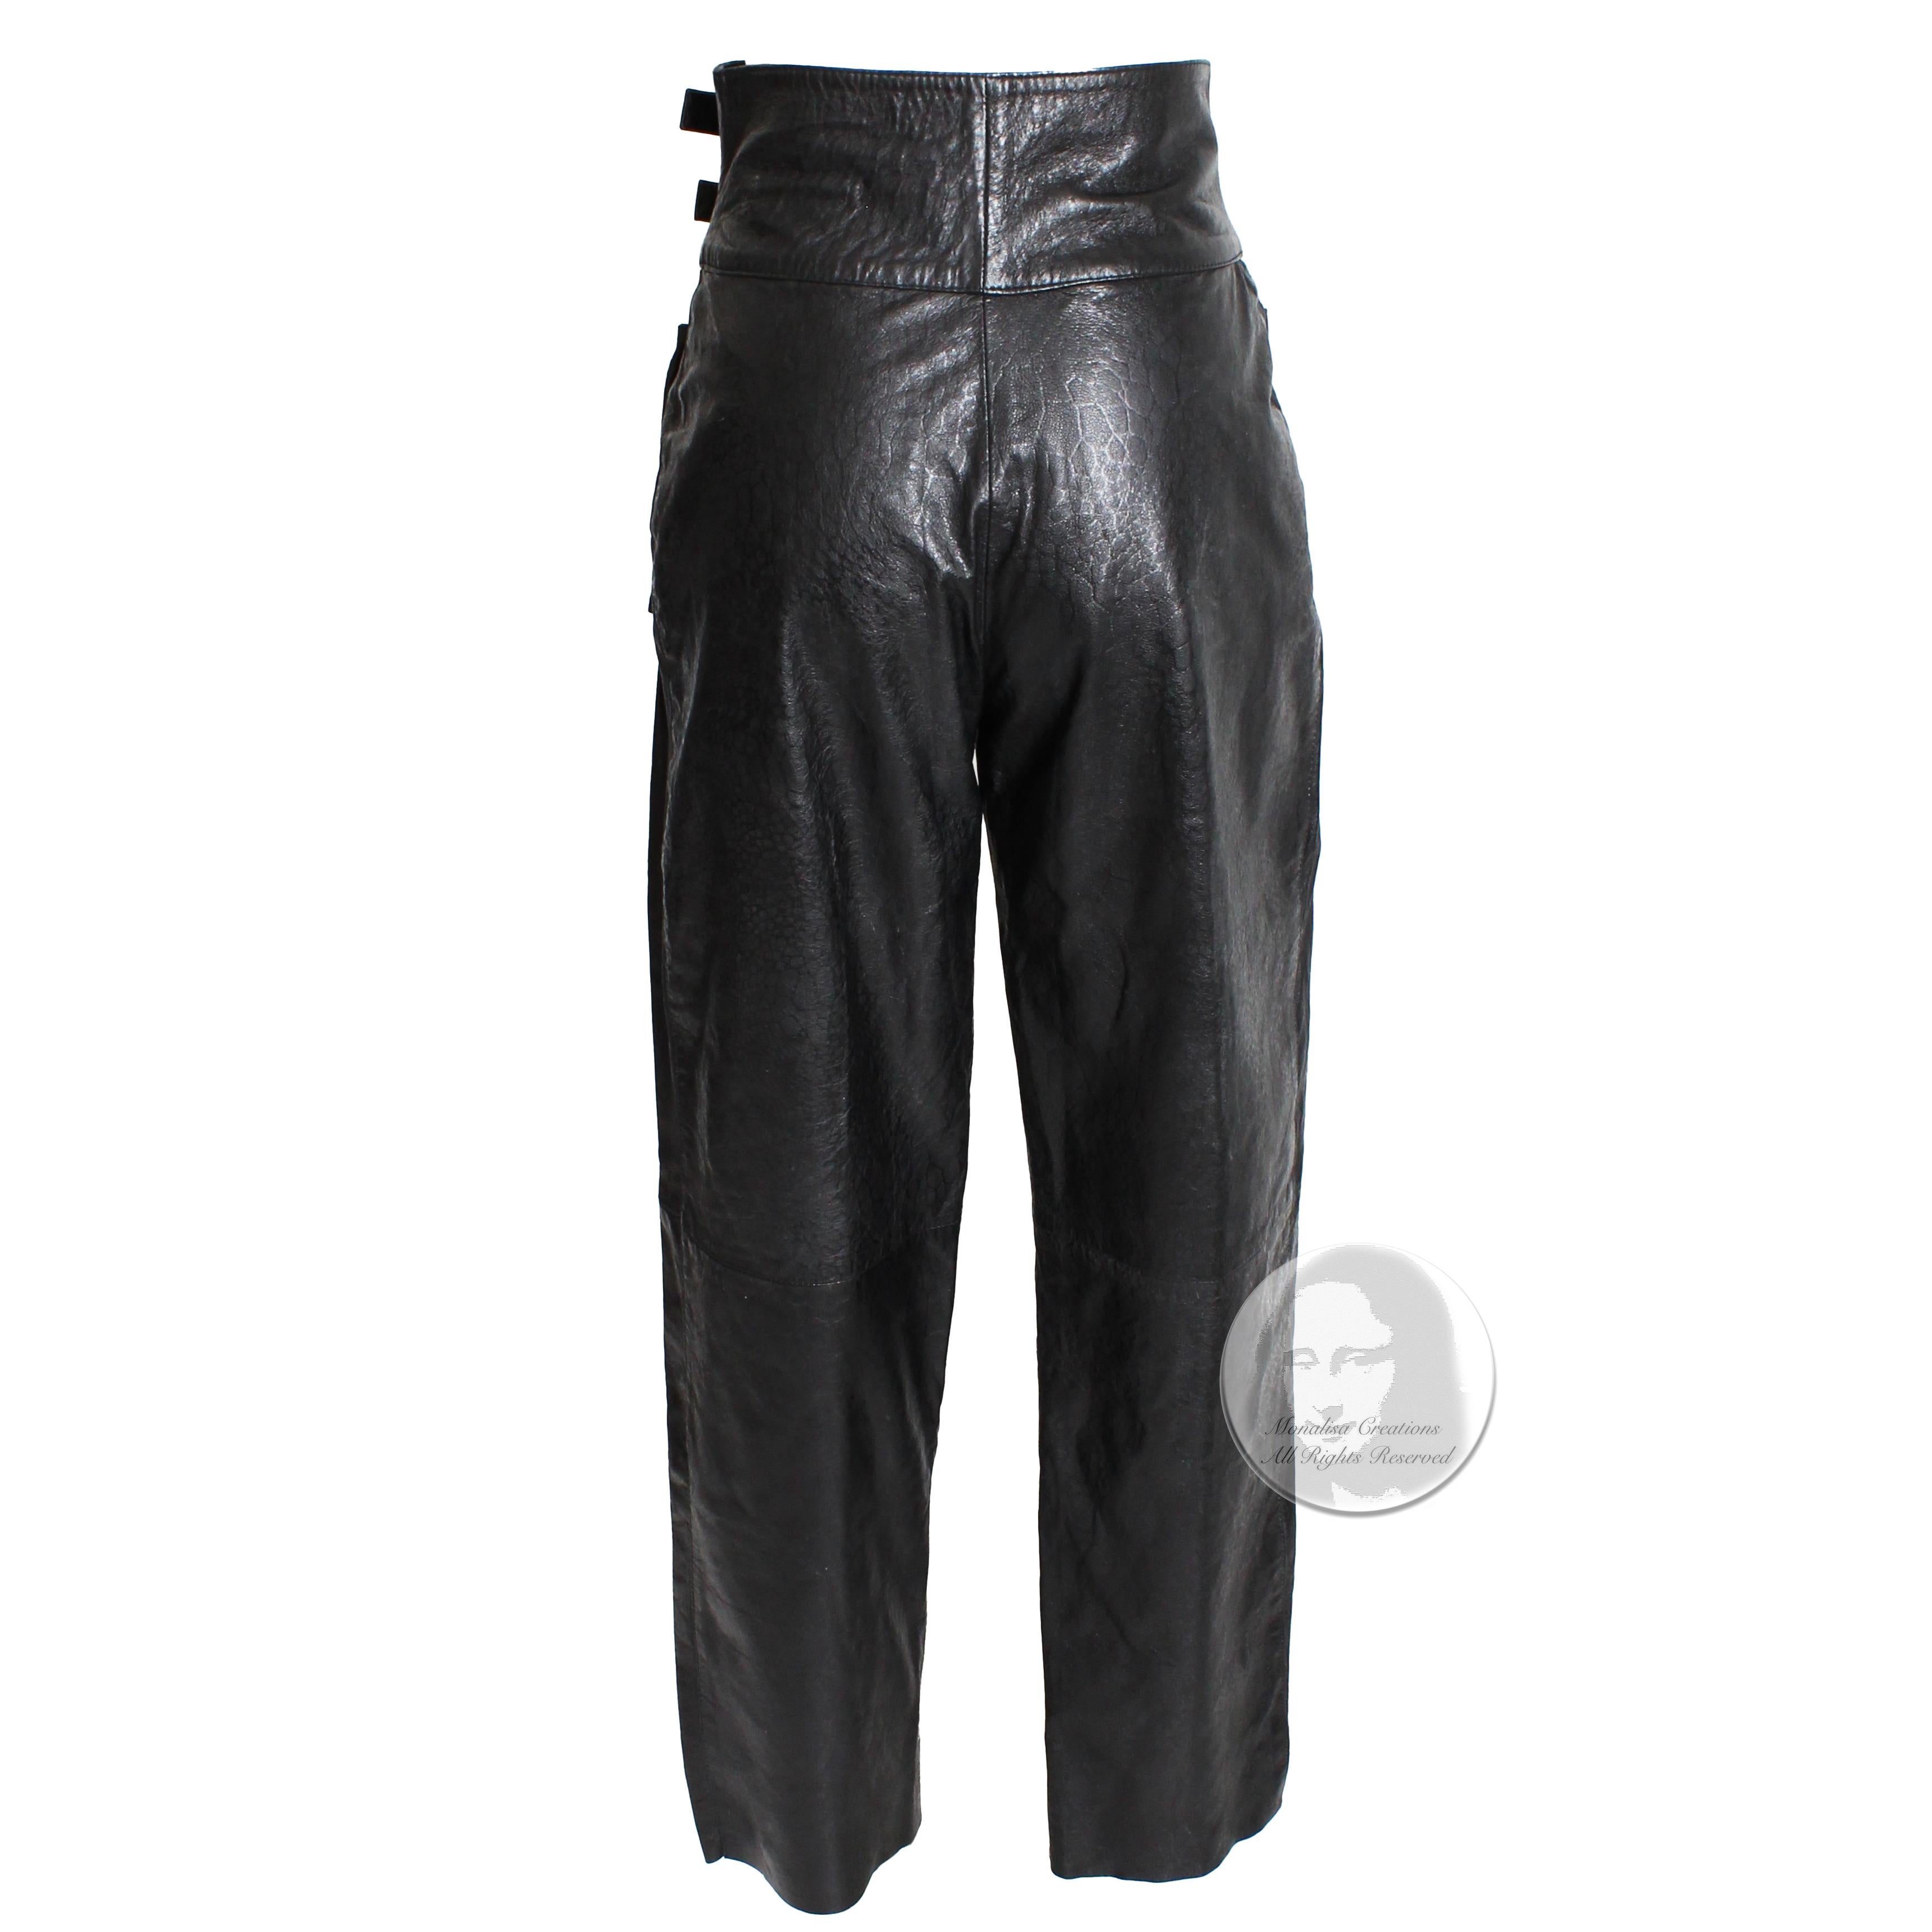 Beged-Or Leather Pants Made in Israel Black Vintage 80s Sz 40 NWT New Old Stock 3